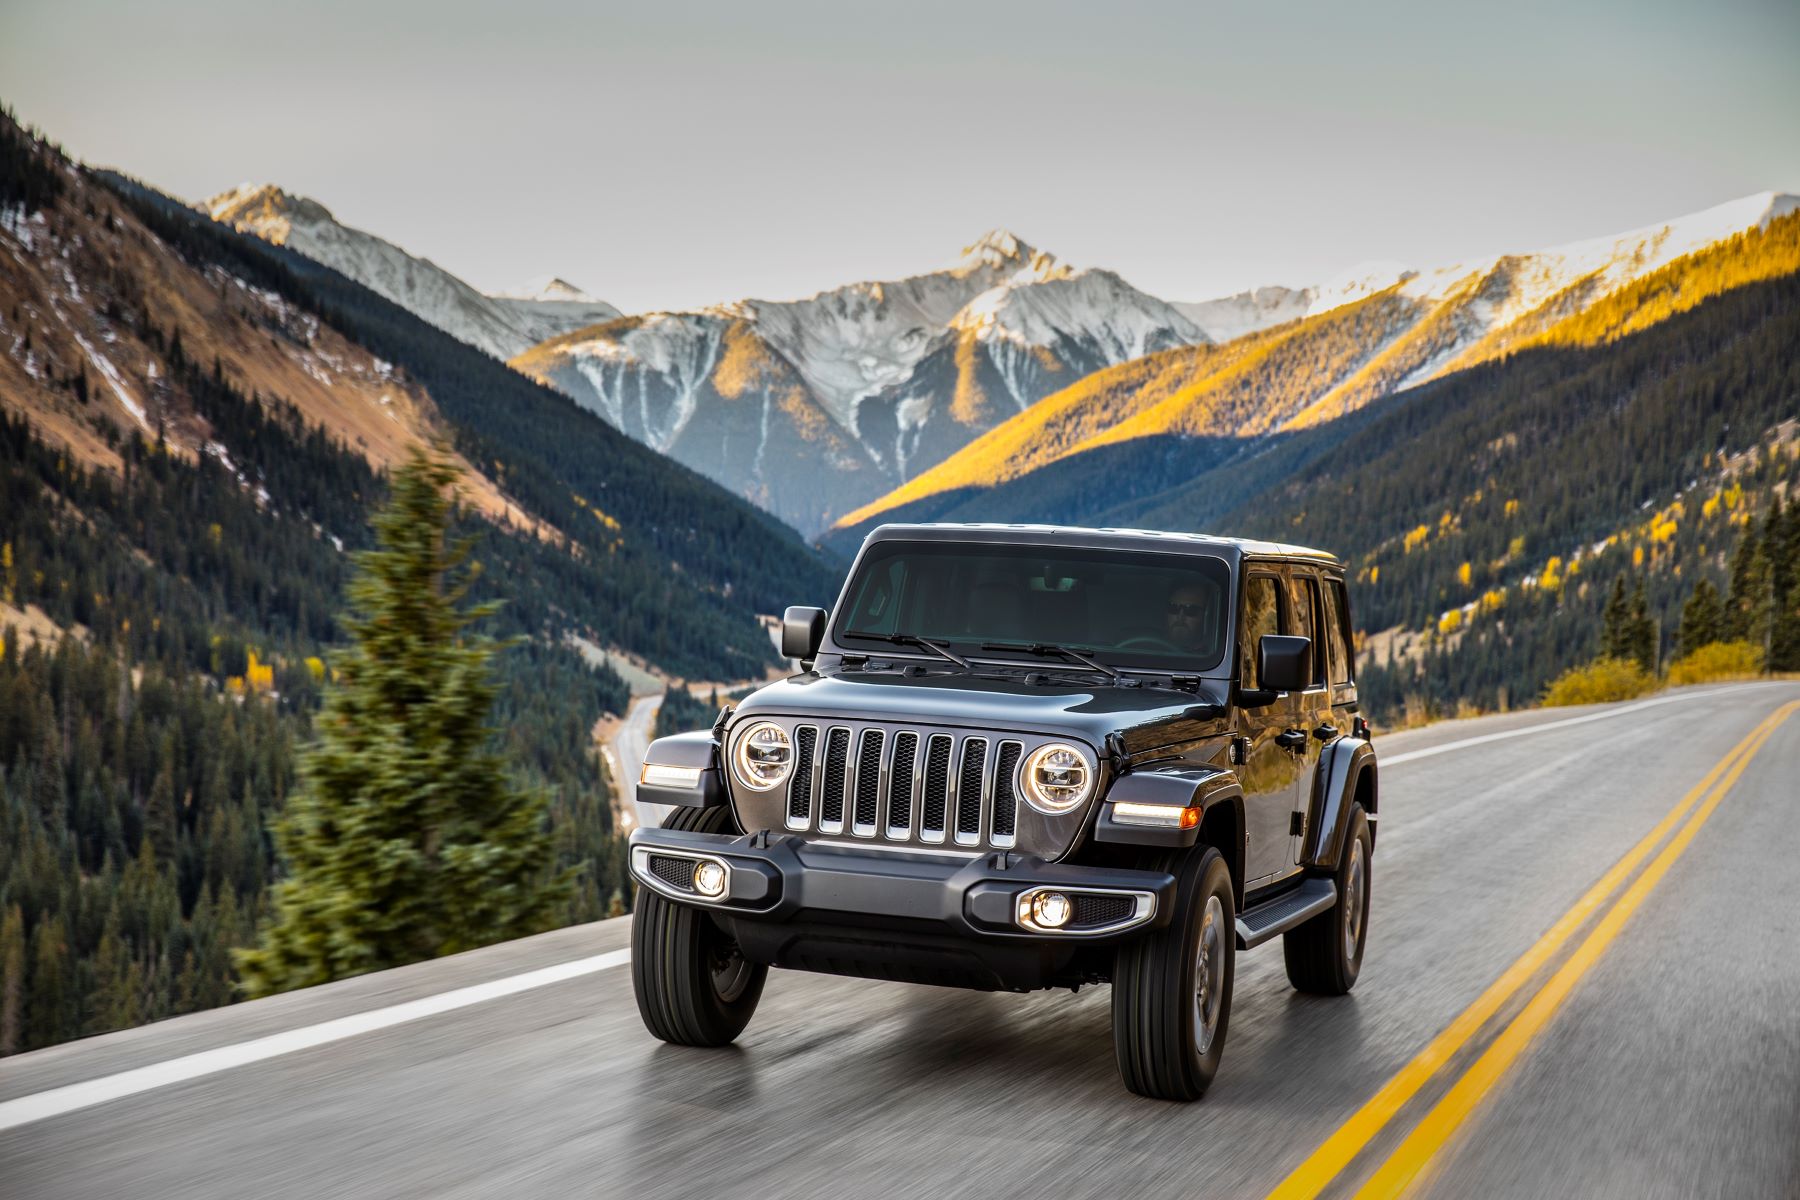 A dark gray Jeep Wrangler Unlimited off-road SUV model driving on a highway near mountains